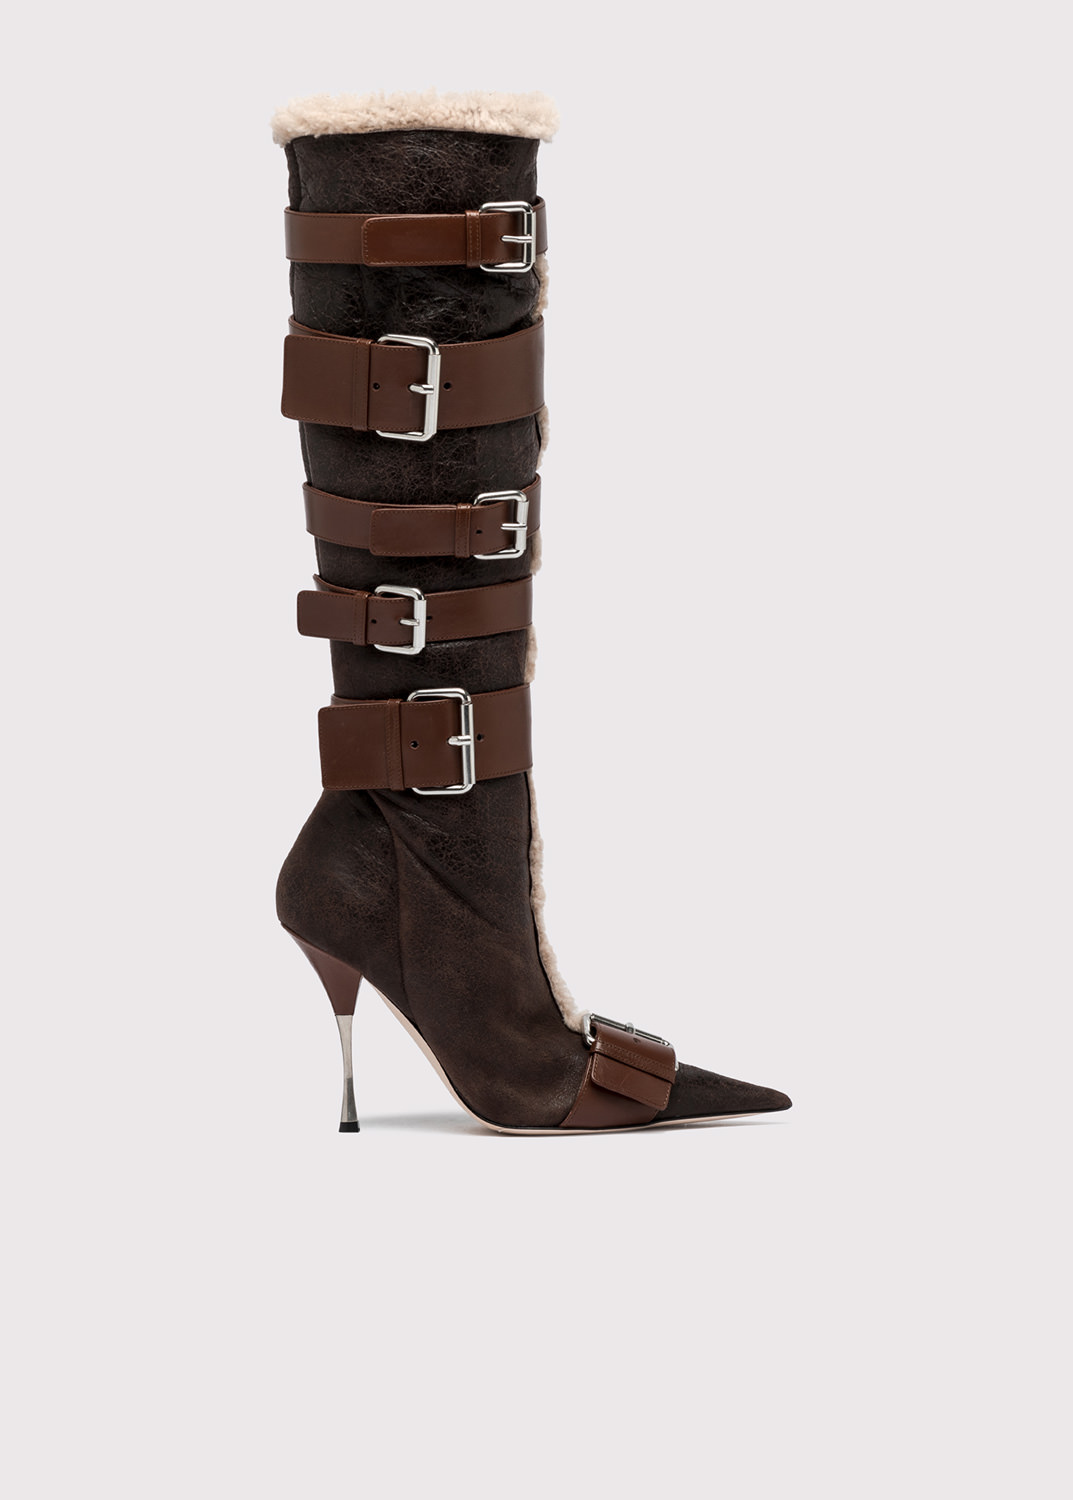 BLUMARINE: HIGH SHEARLING BOOTS WITH BUCKLES